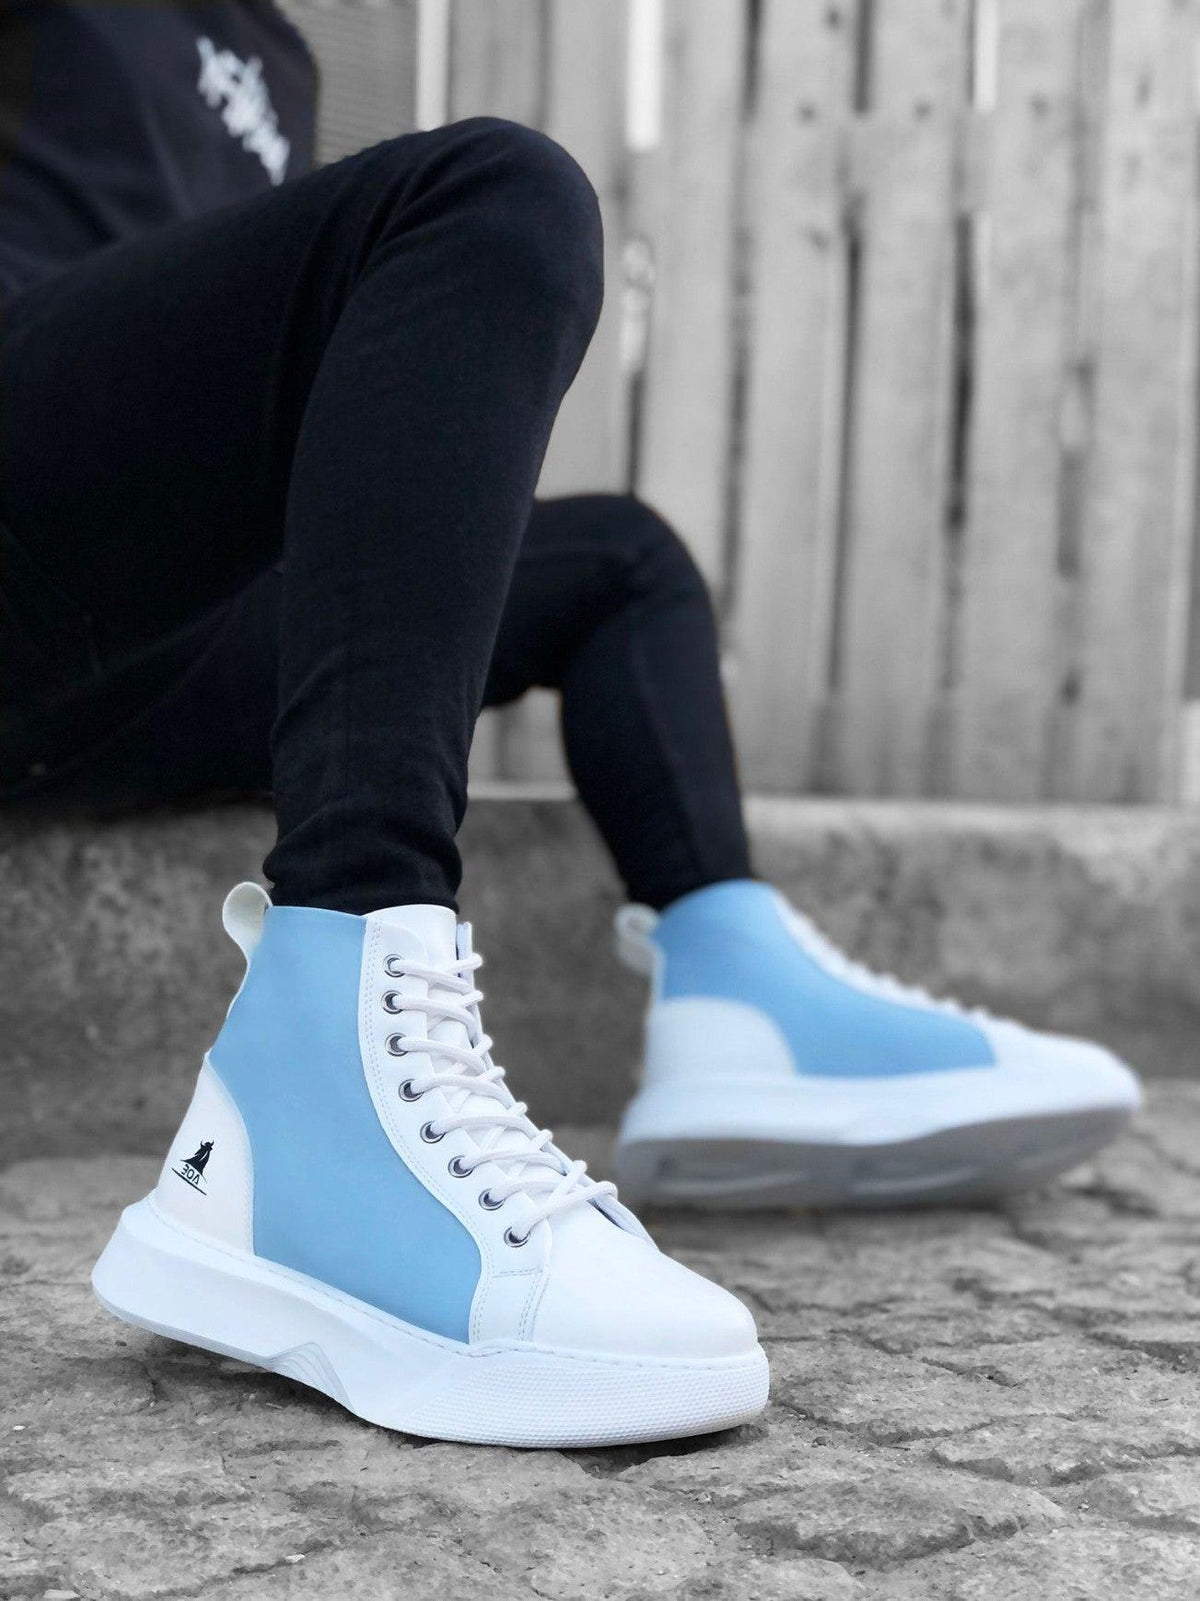 BA0256 Lace-up Men's High Sole White Blue Sole Sports Boots - STREET MODE ™